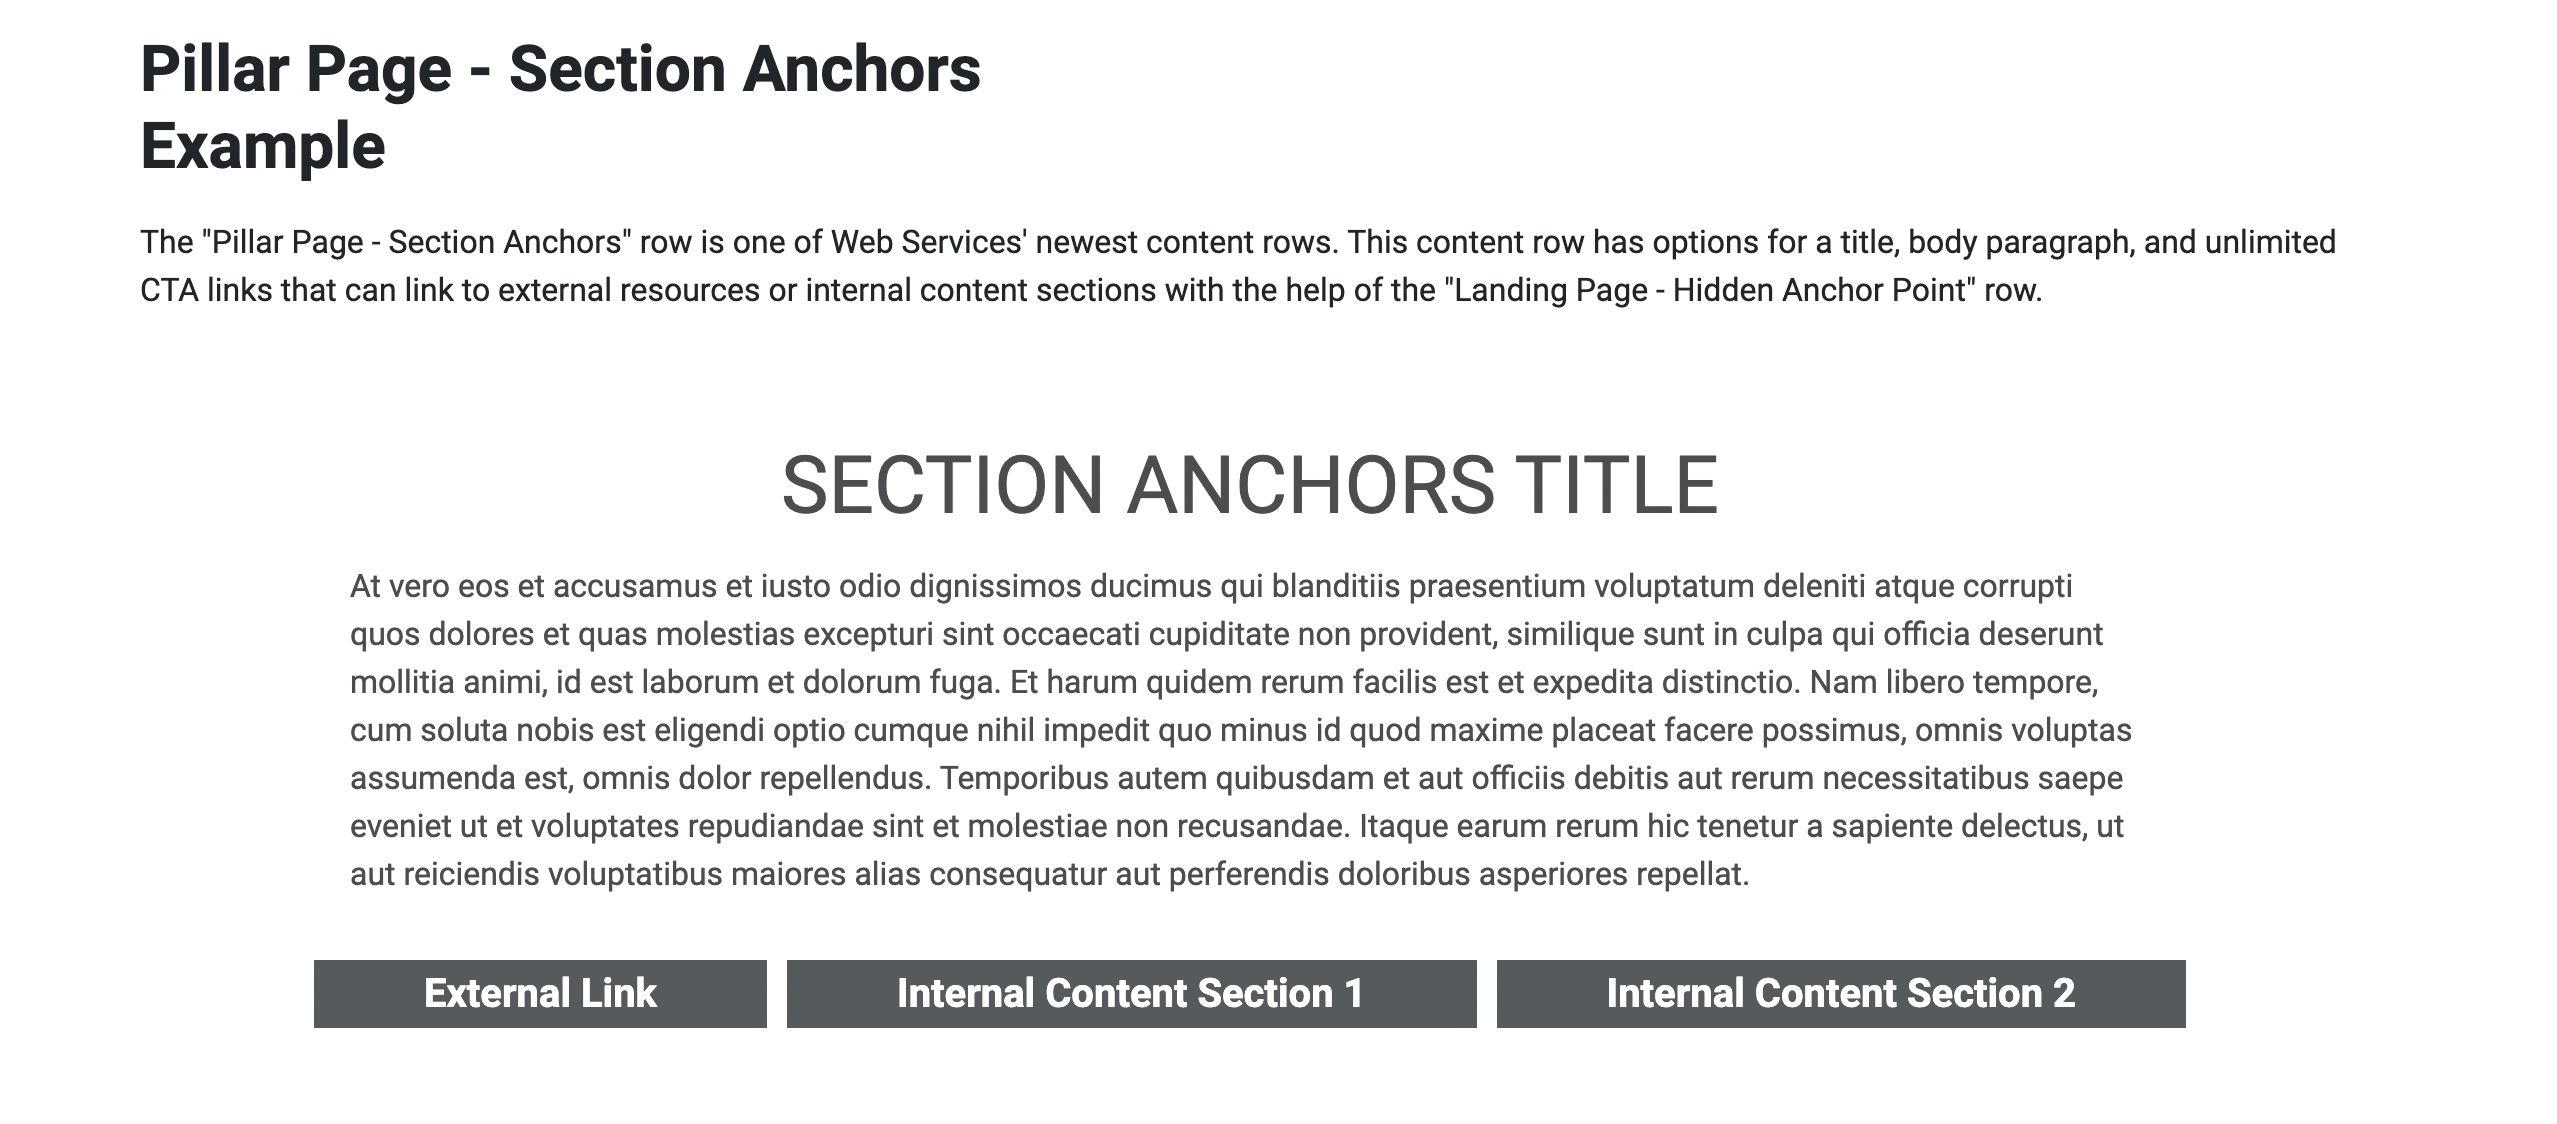 Pillar Page - Section Anchors